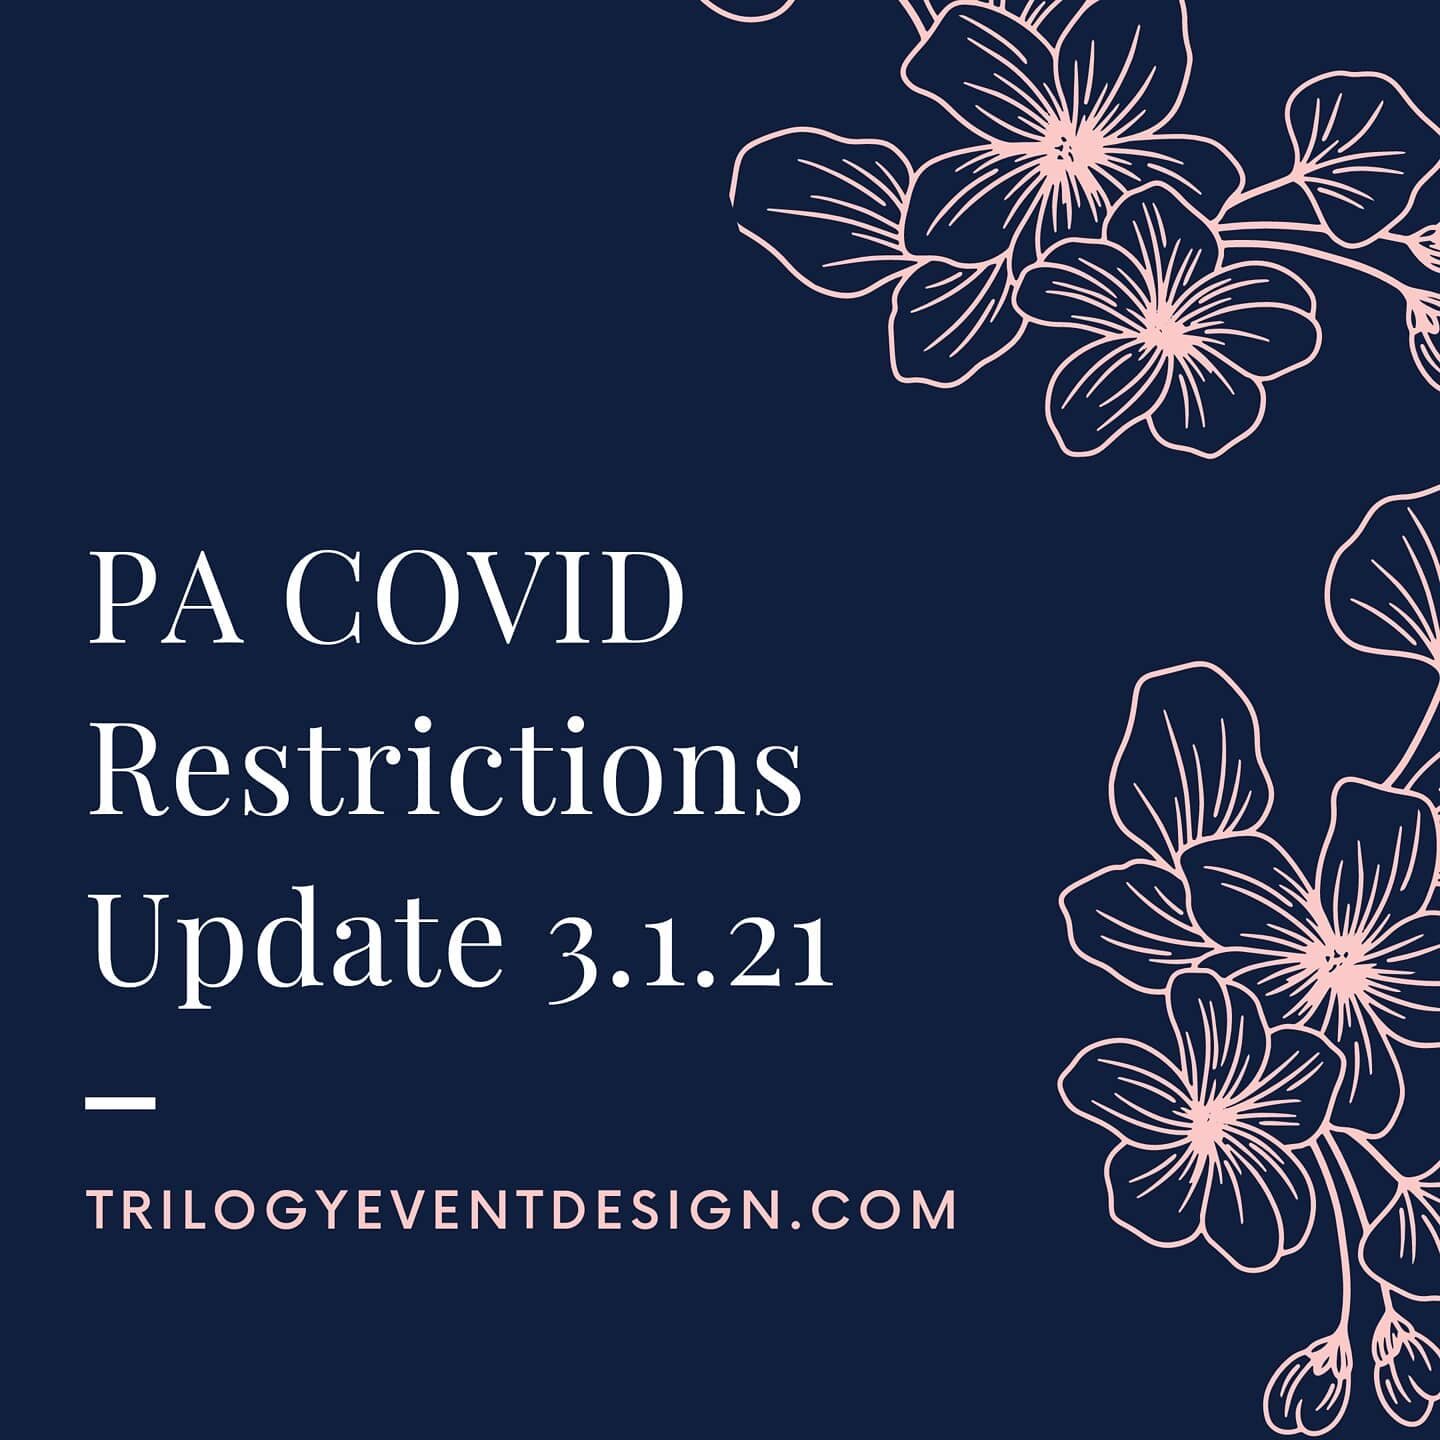 As of March 1, PA COVID-19 restrictions  have been modified as follows:

🌸 Outdoor events are now limited to a 20% maximum occupancy, no matter the venue size.

🌸 Indoor events are now limited to 15% maximum occupancy, no matter the venue size.

Go